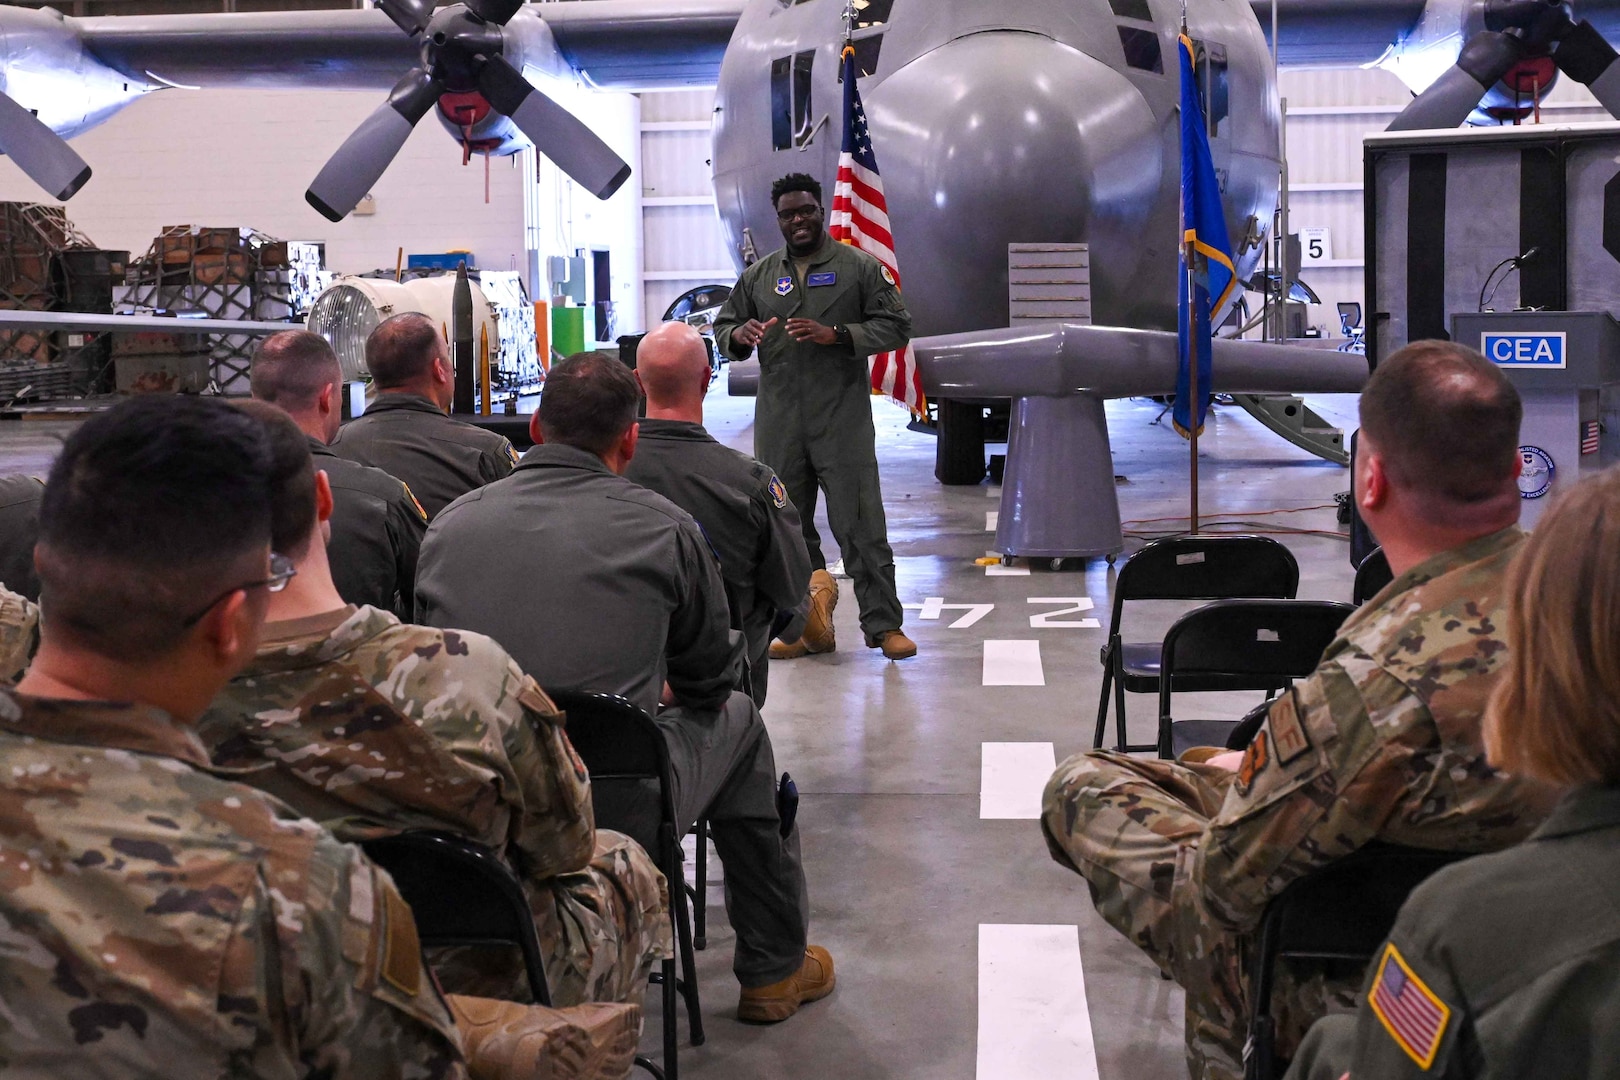 U.S. Air Force Master Sgt. Raheem Crockett, 344th Training Squadron basic loadmaster course instructor, briefs leaders from the 97th Air Mobility Wing on the loadmaster initial training course at the 37th Training Wing’s Career Enlisted Aviator Center of Excellence (CEA CoE) on Joint Base San Antonio-Lackland, Texas, May 14, 2024. The group of over 40 people toured CEA CoE to get a glimpse of what aircrew Airmen entering the boom operator and loadmaster schoolhouses, located at Altus Air Force Base, learn before stepping into Mobility’s Hometown. (U.S. Air Force photo by Senior Airman Kari Degraffenreed)